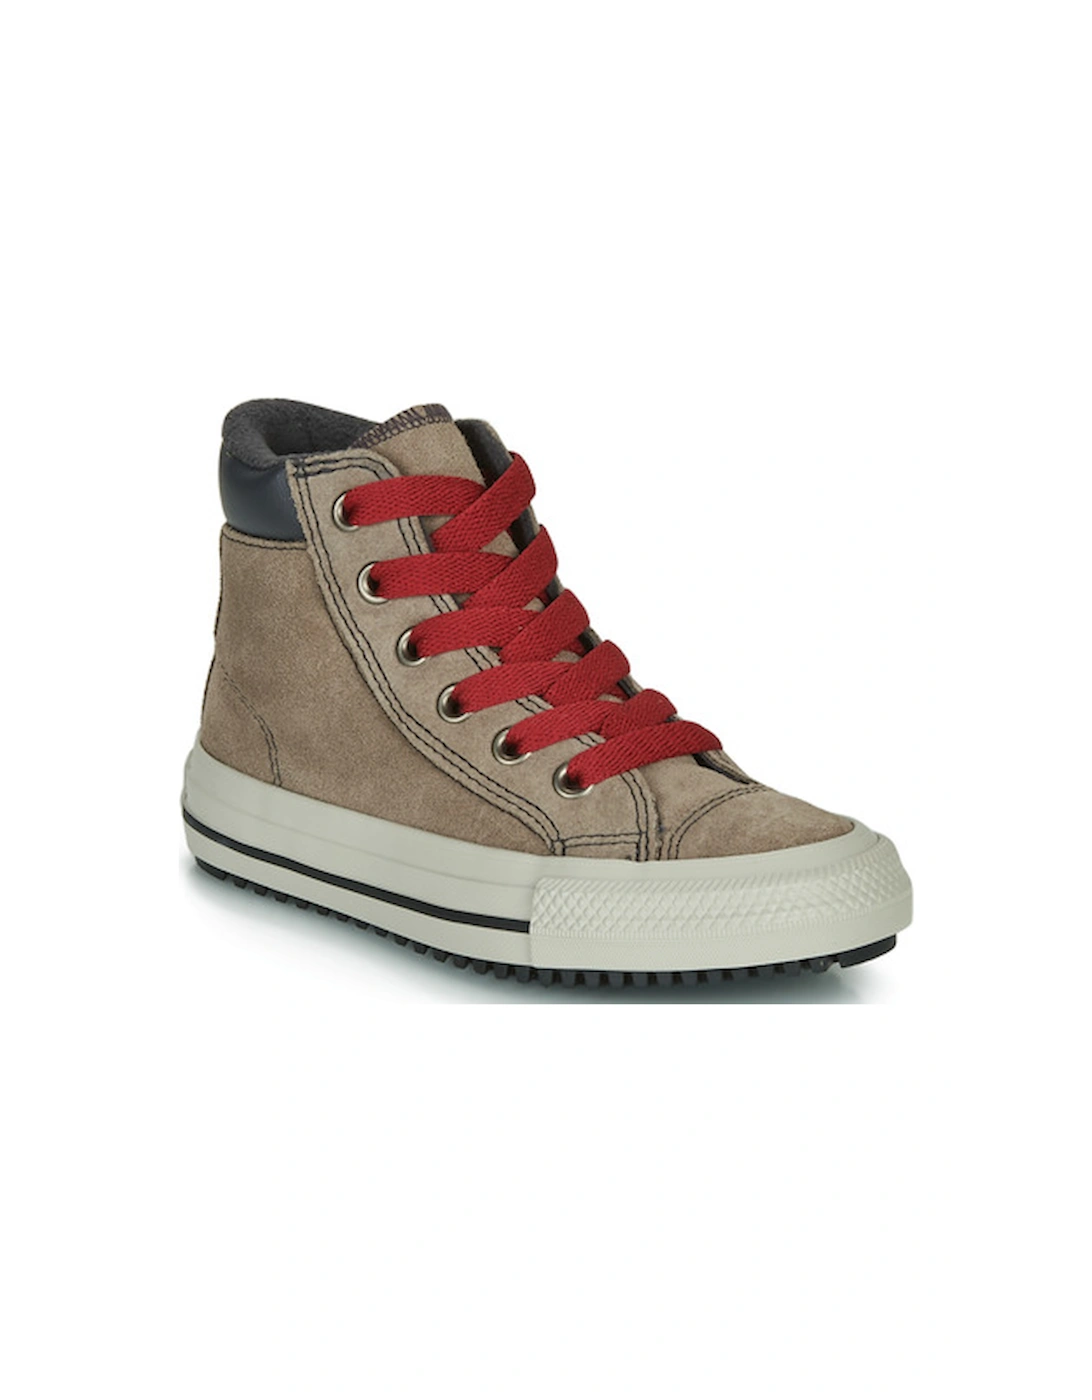 CHUCK TAYLOR ALL STAR PC BOOT BOOTS ON MARS - HI, 8 of 7